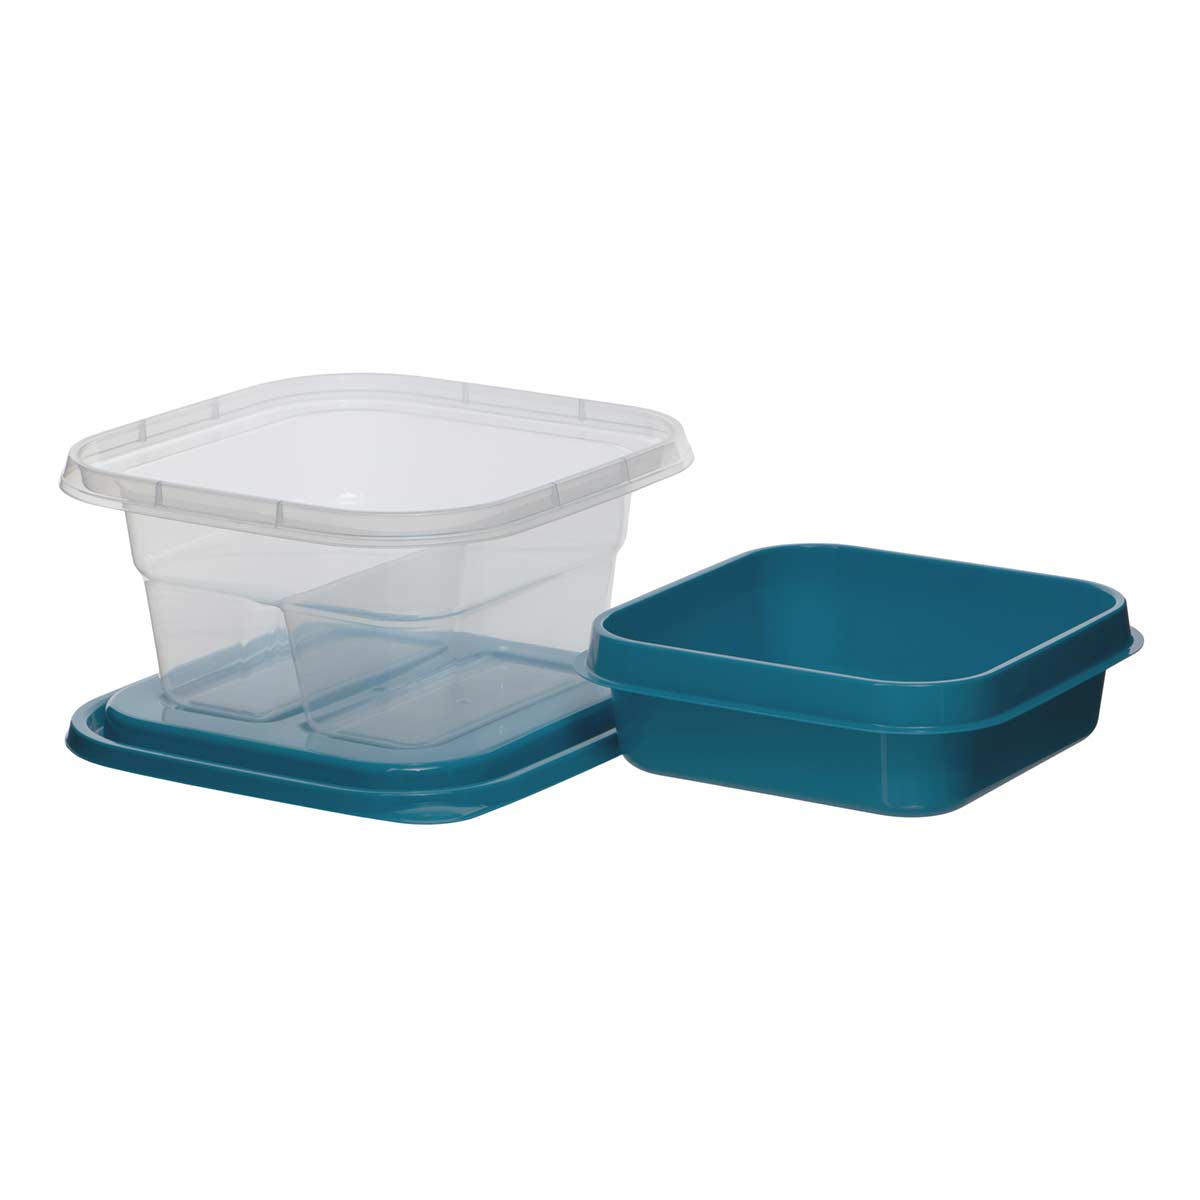 https://www.goodcook.com/media/catalog/product/g/o/goodcook-everyware-lunch-cube-food-storage-container-002.jpg?auto=webp&format=pjpg